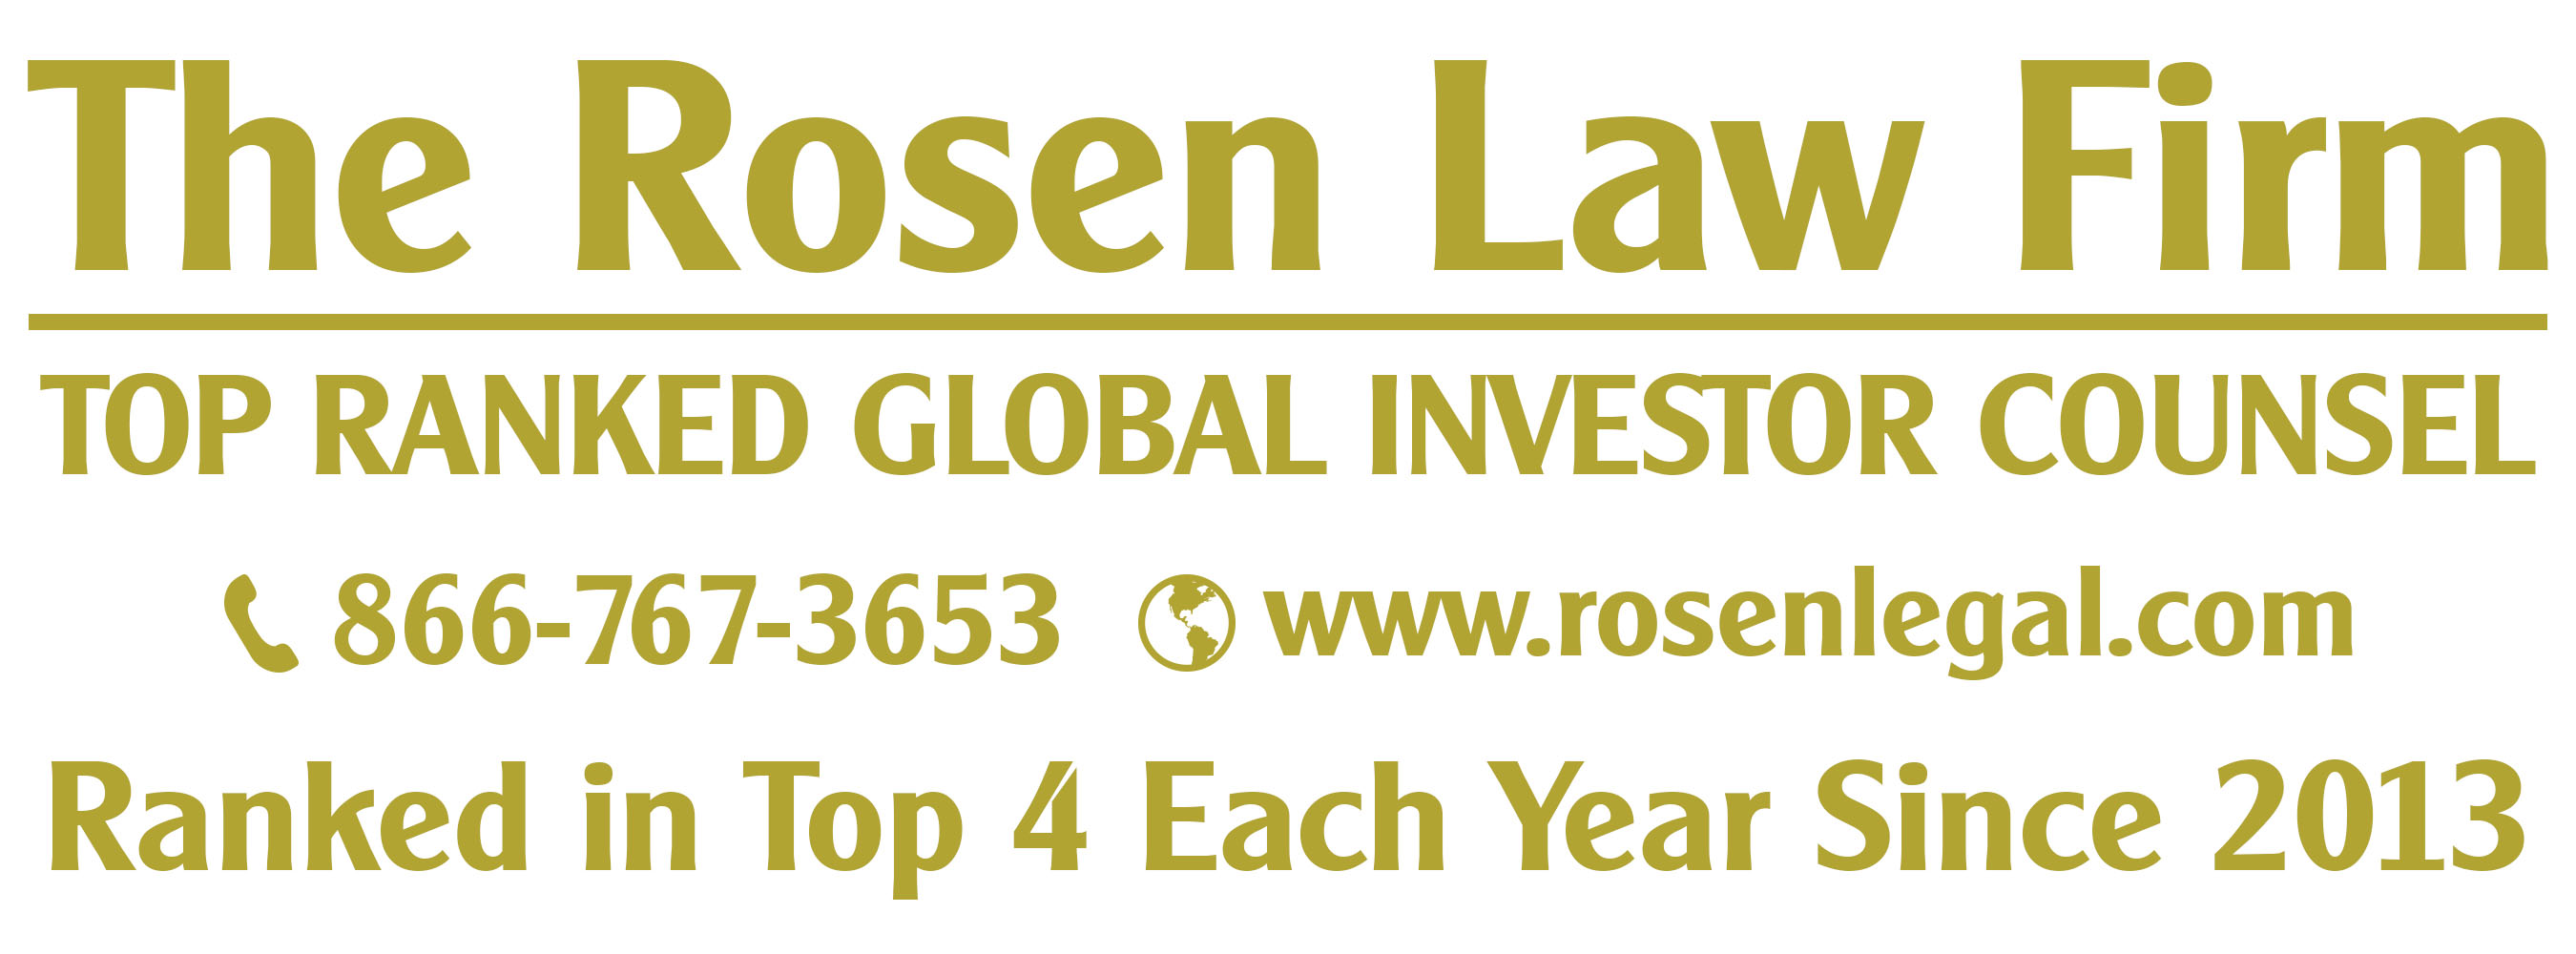 Rosen Law Firm PA, Monday, October 3, 2022, Press release picture